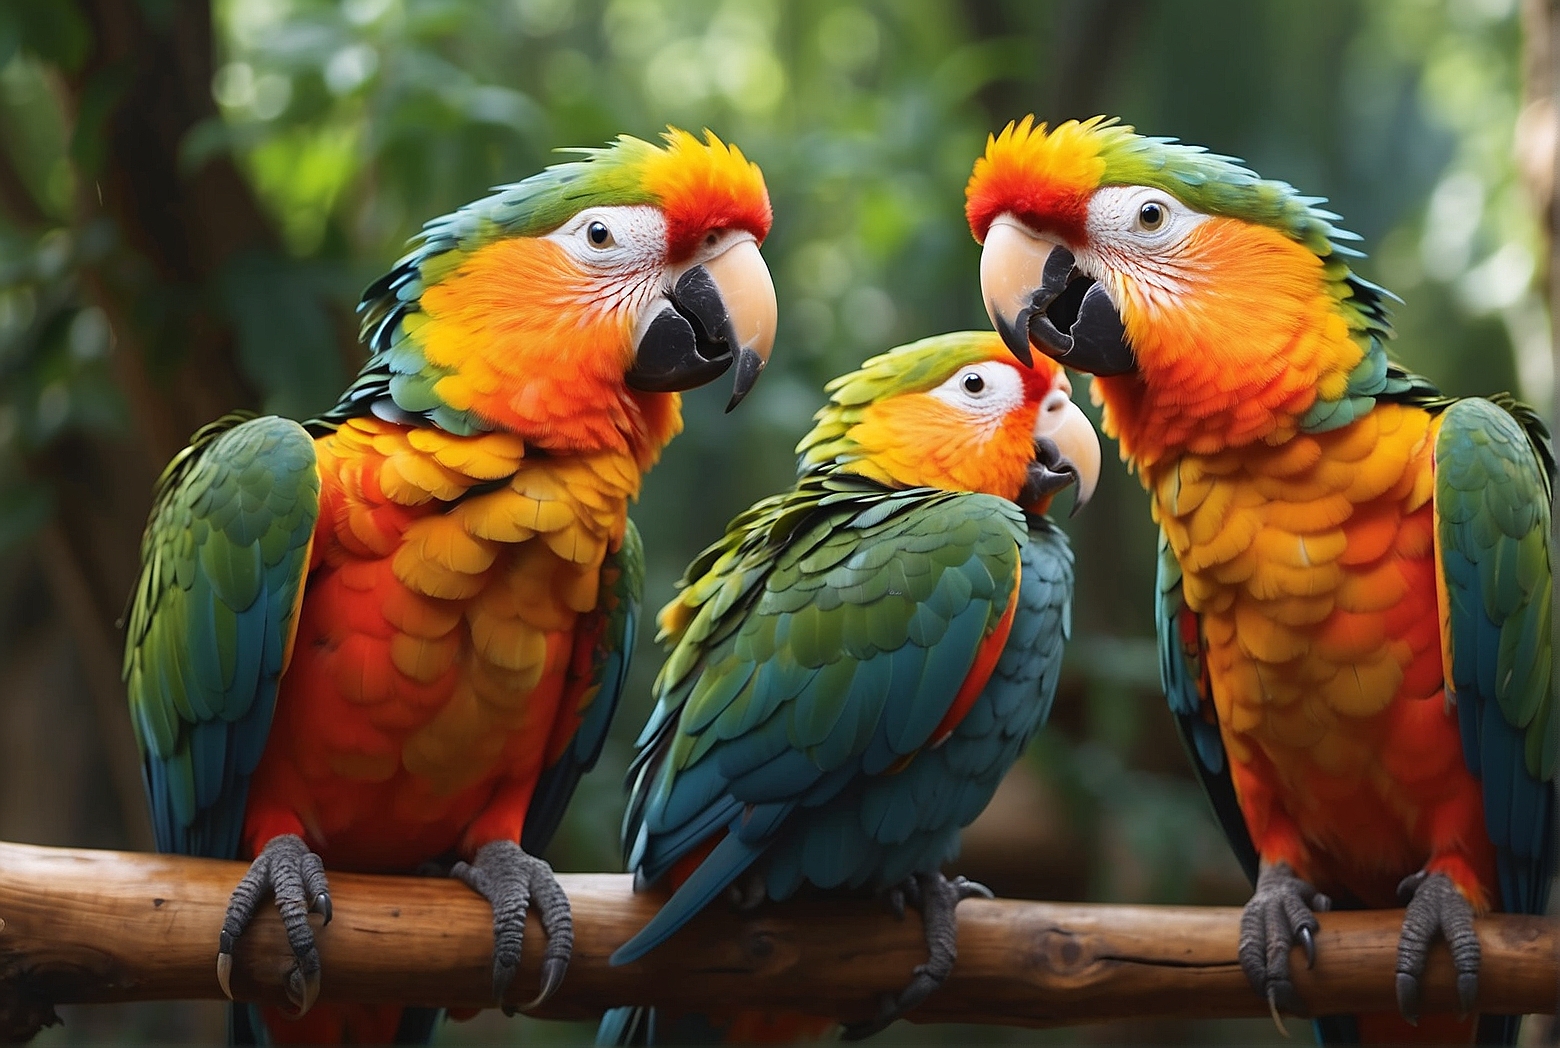 Can You Communicate with a Parrot?